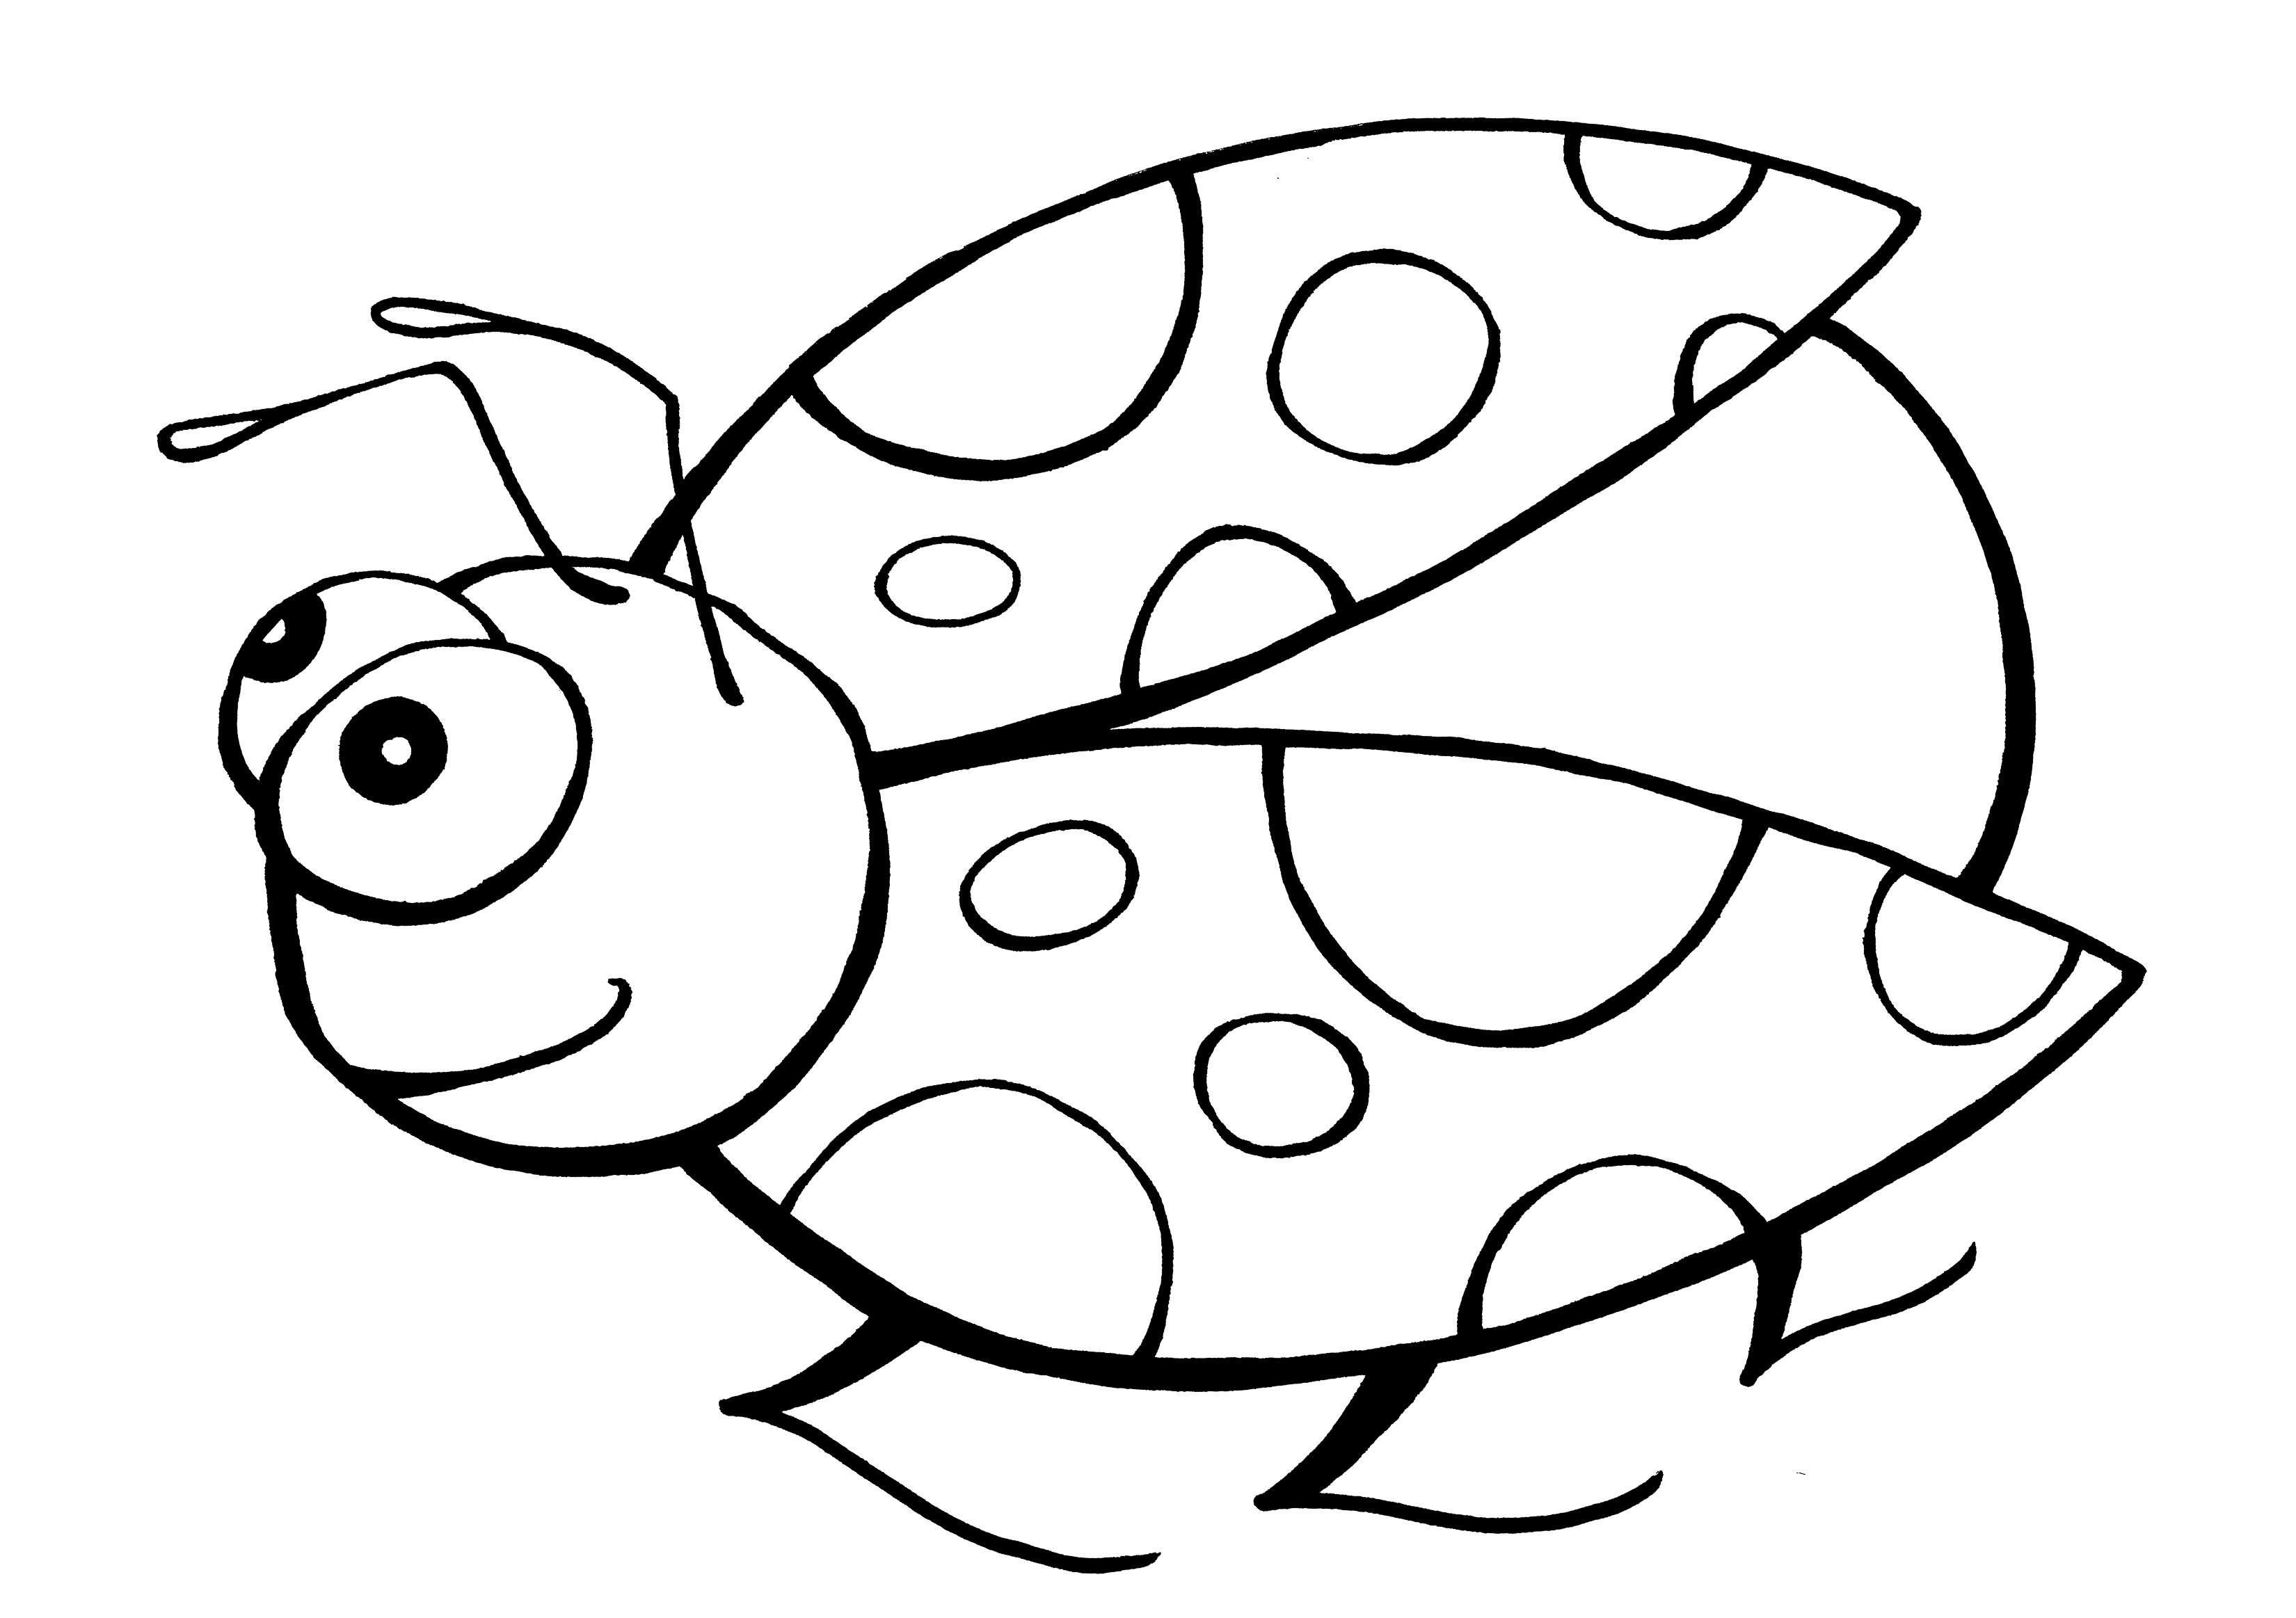 Ladybug coloring pages to download and print for free